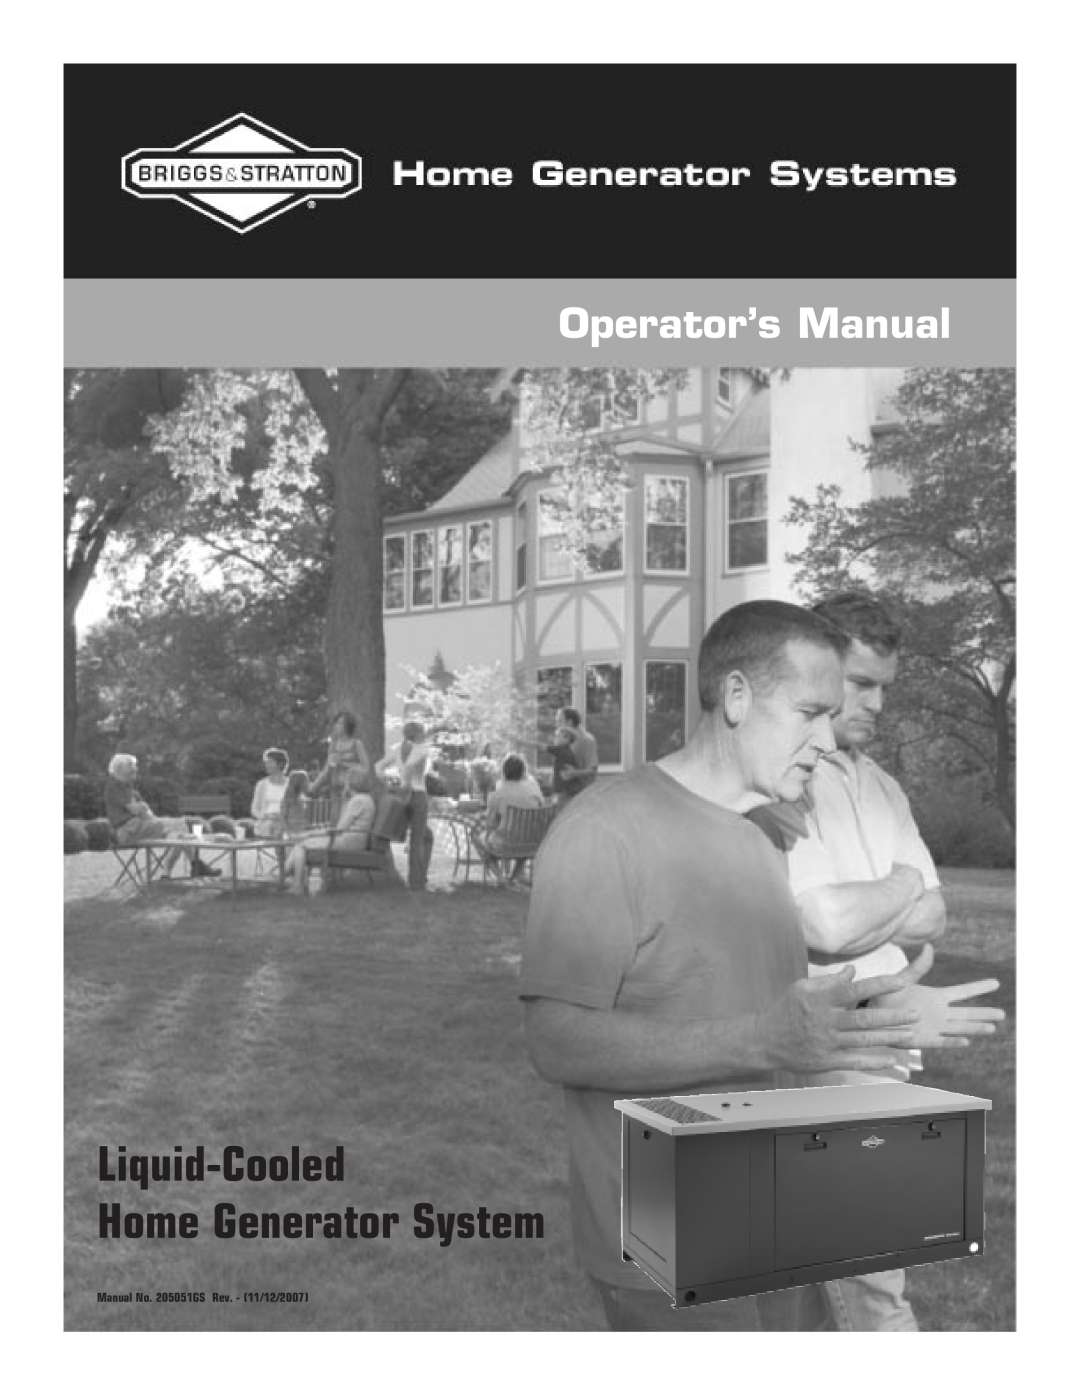 Briggs & Stratton 205051GS system manual Liquid-Cooled Home Generator System, Operator’s Manual 